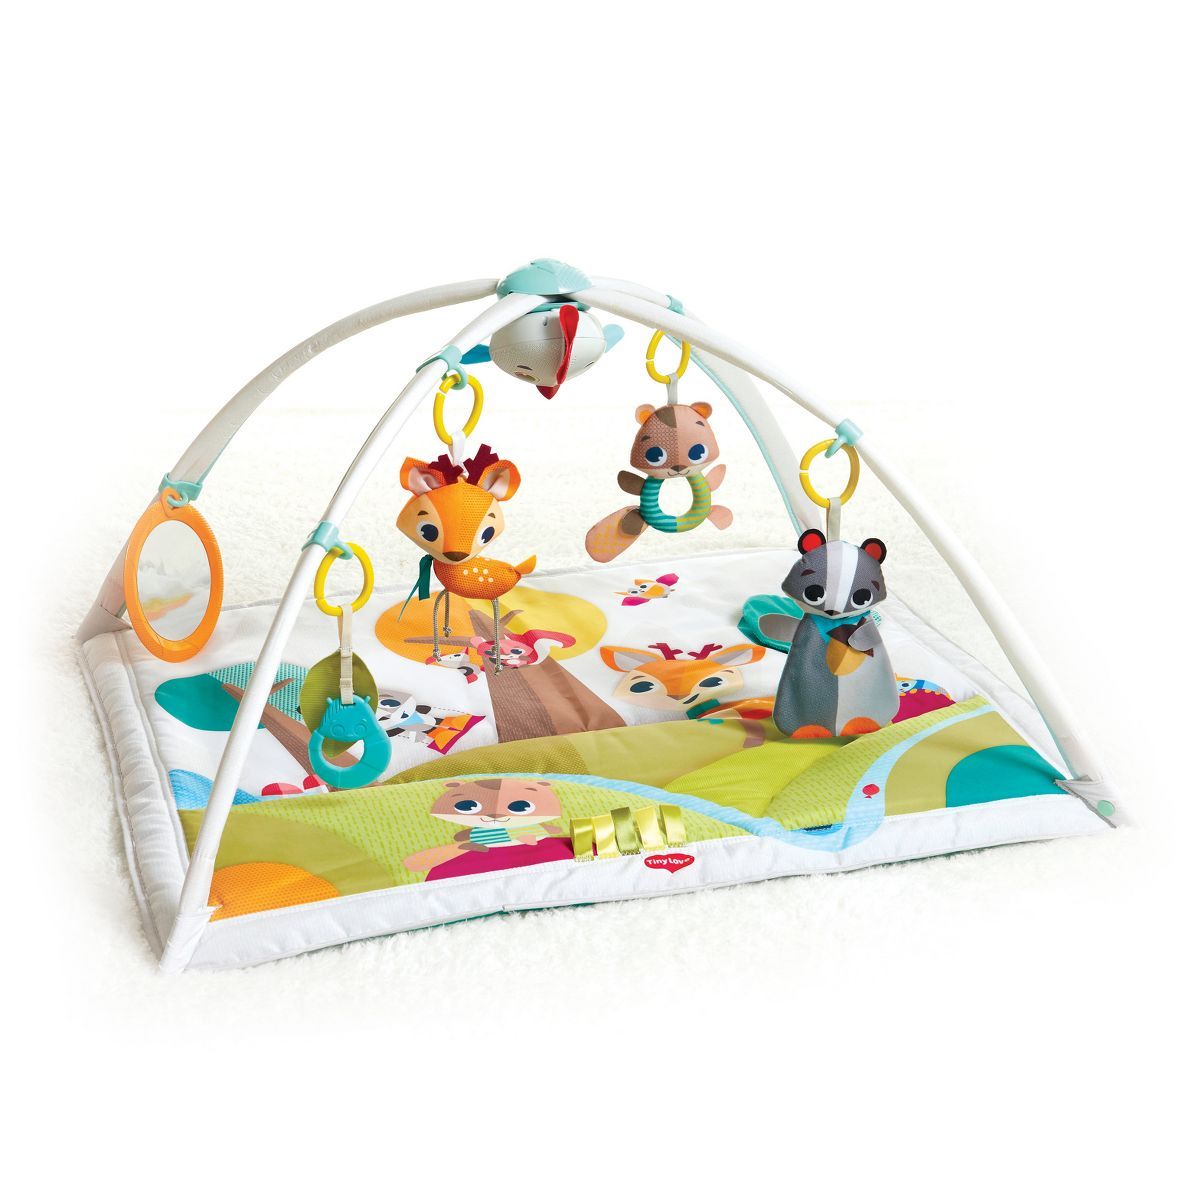 Tiny Love Gymini Deluxe Activity Gym Play Mat - Into the Forest | Target